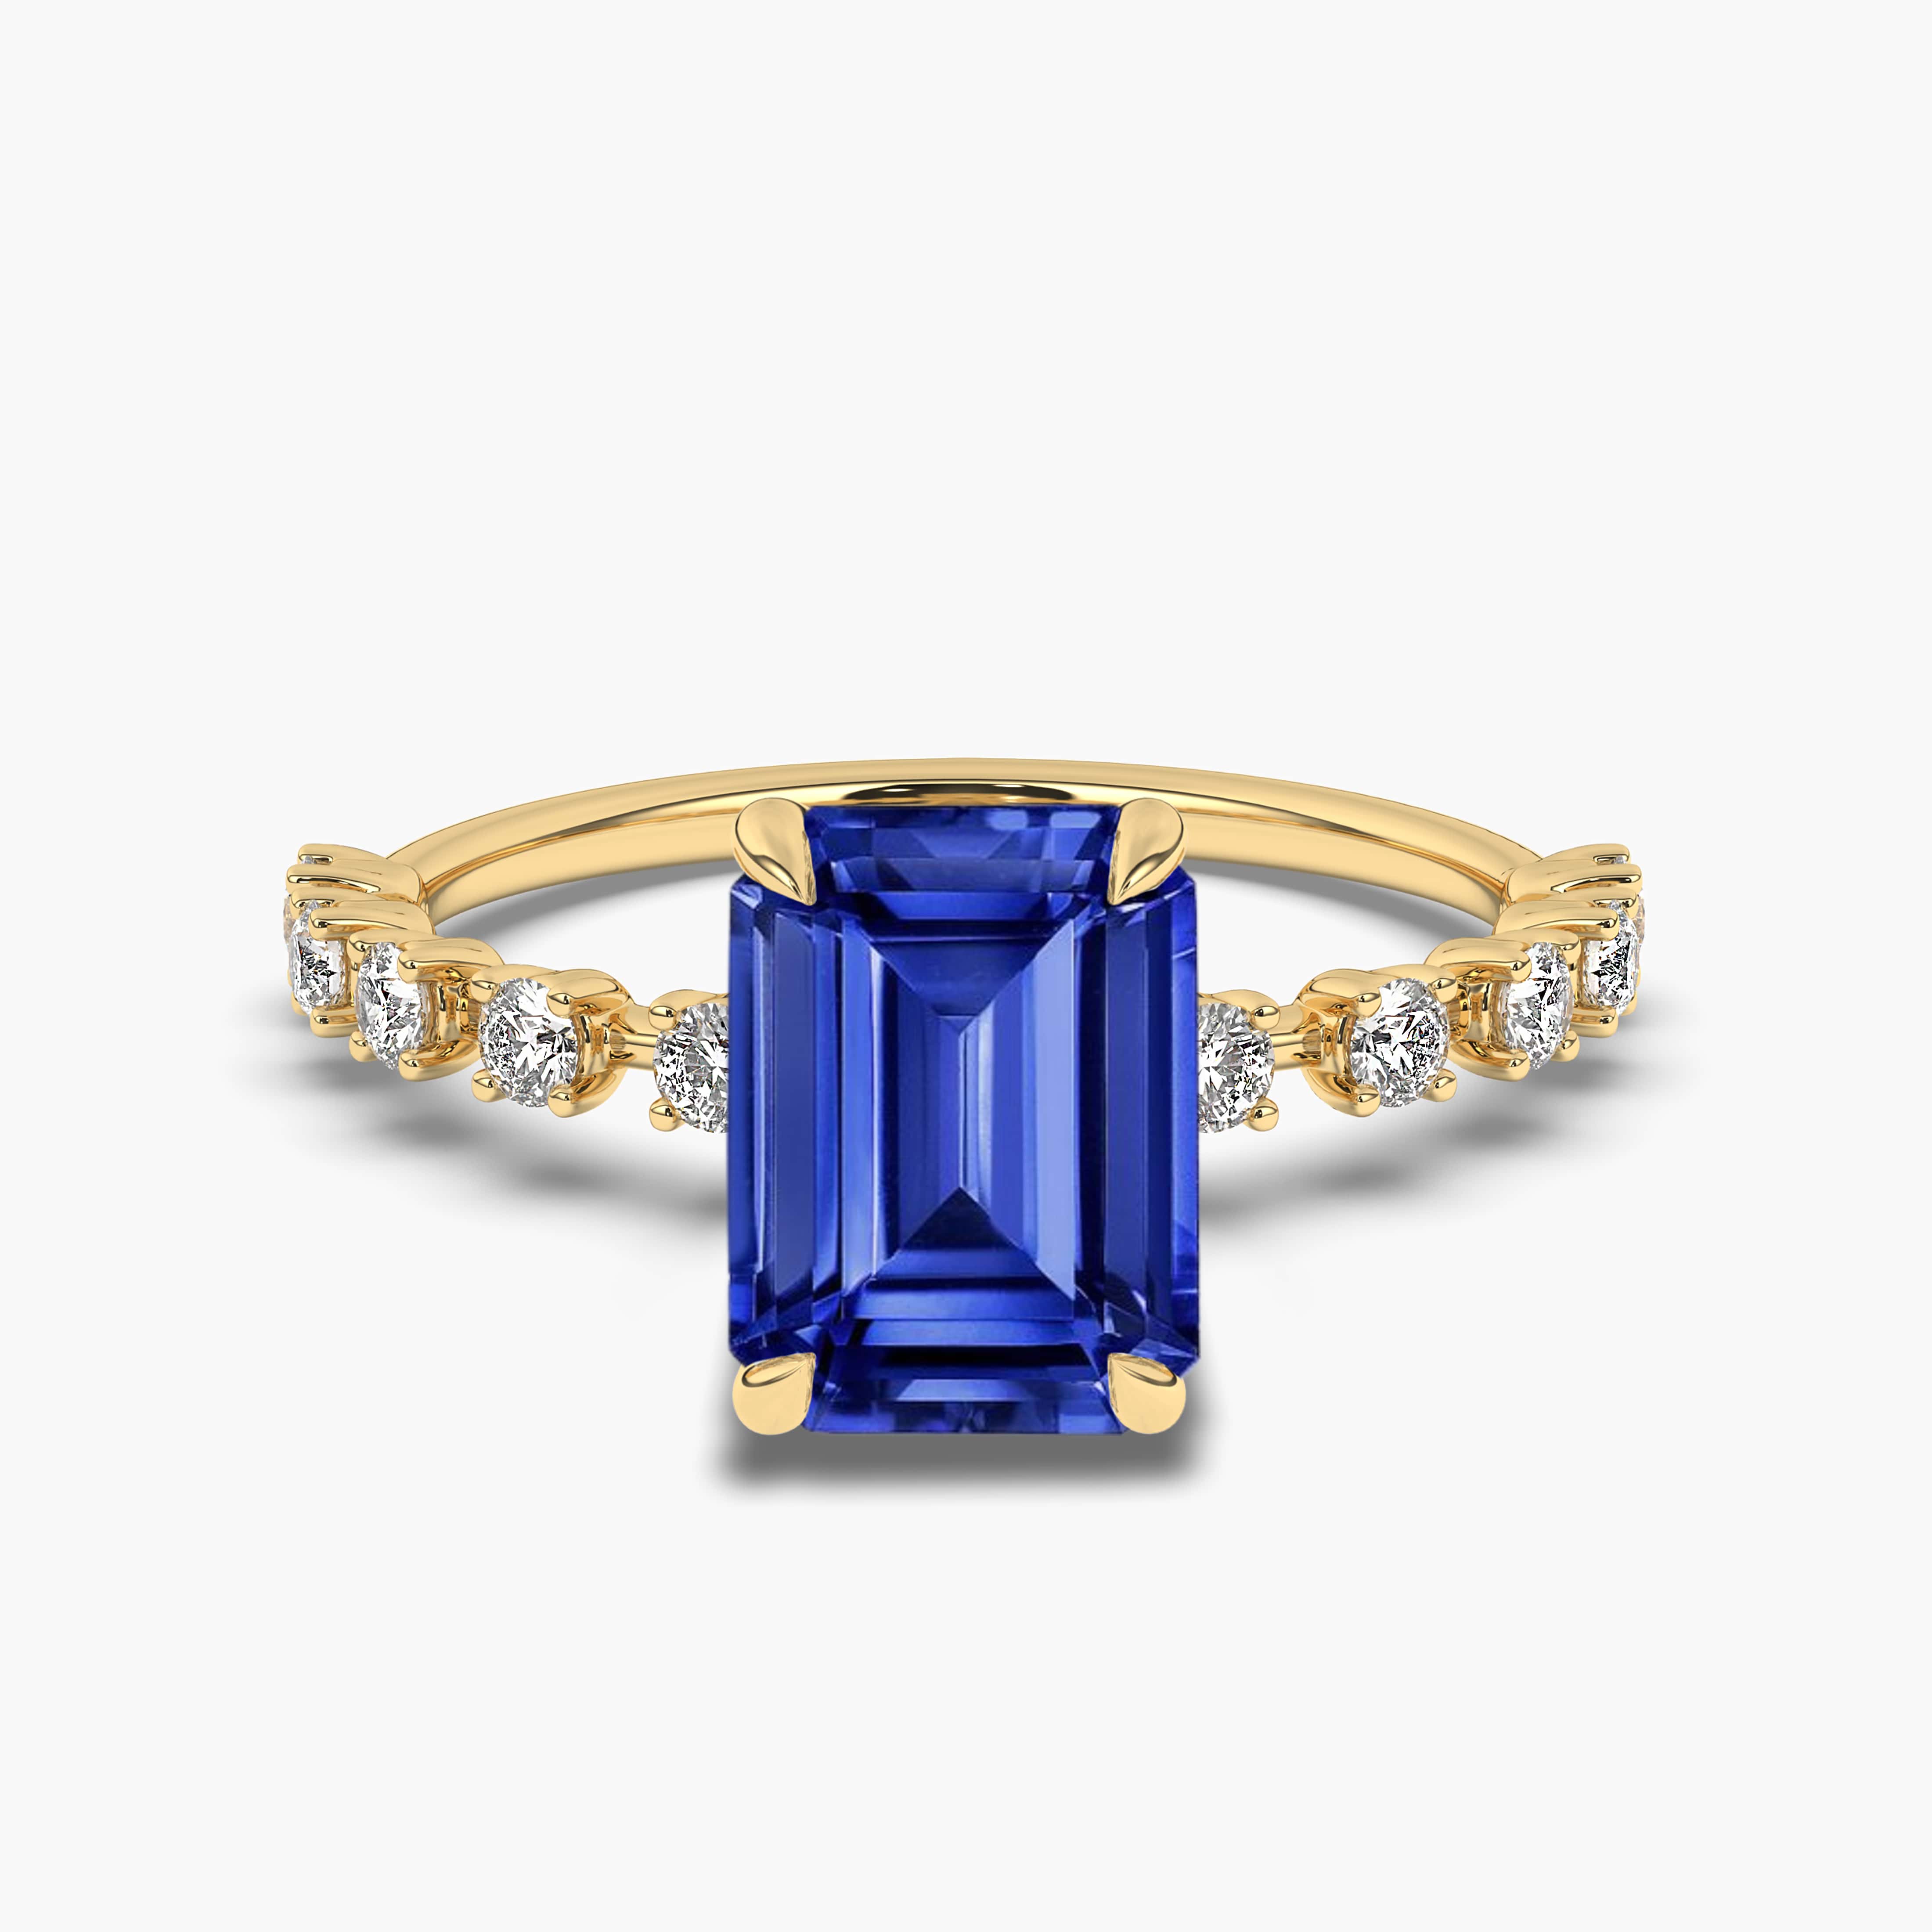 EMERALD CUT SAPPHIRE ENGAGEMENT RING IN YELLOW GOLD